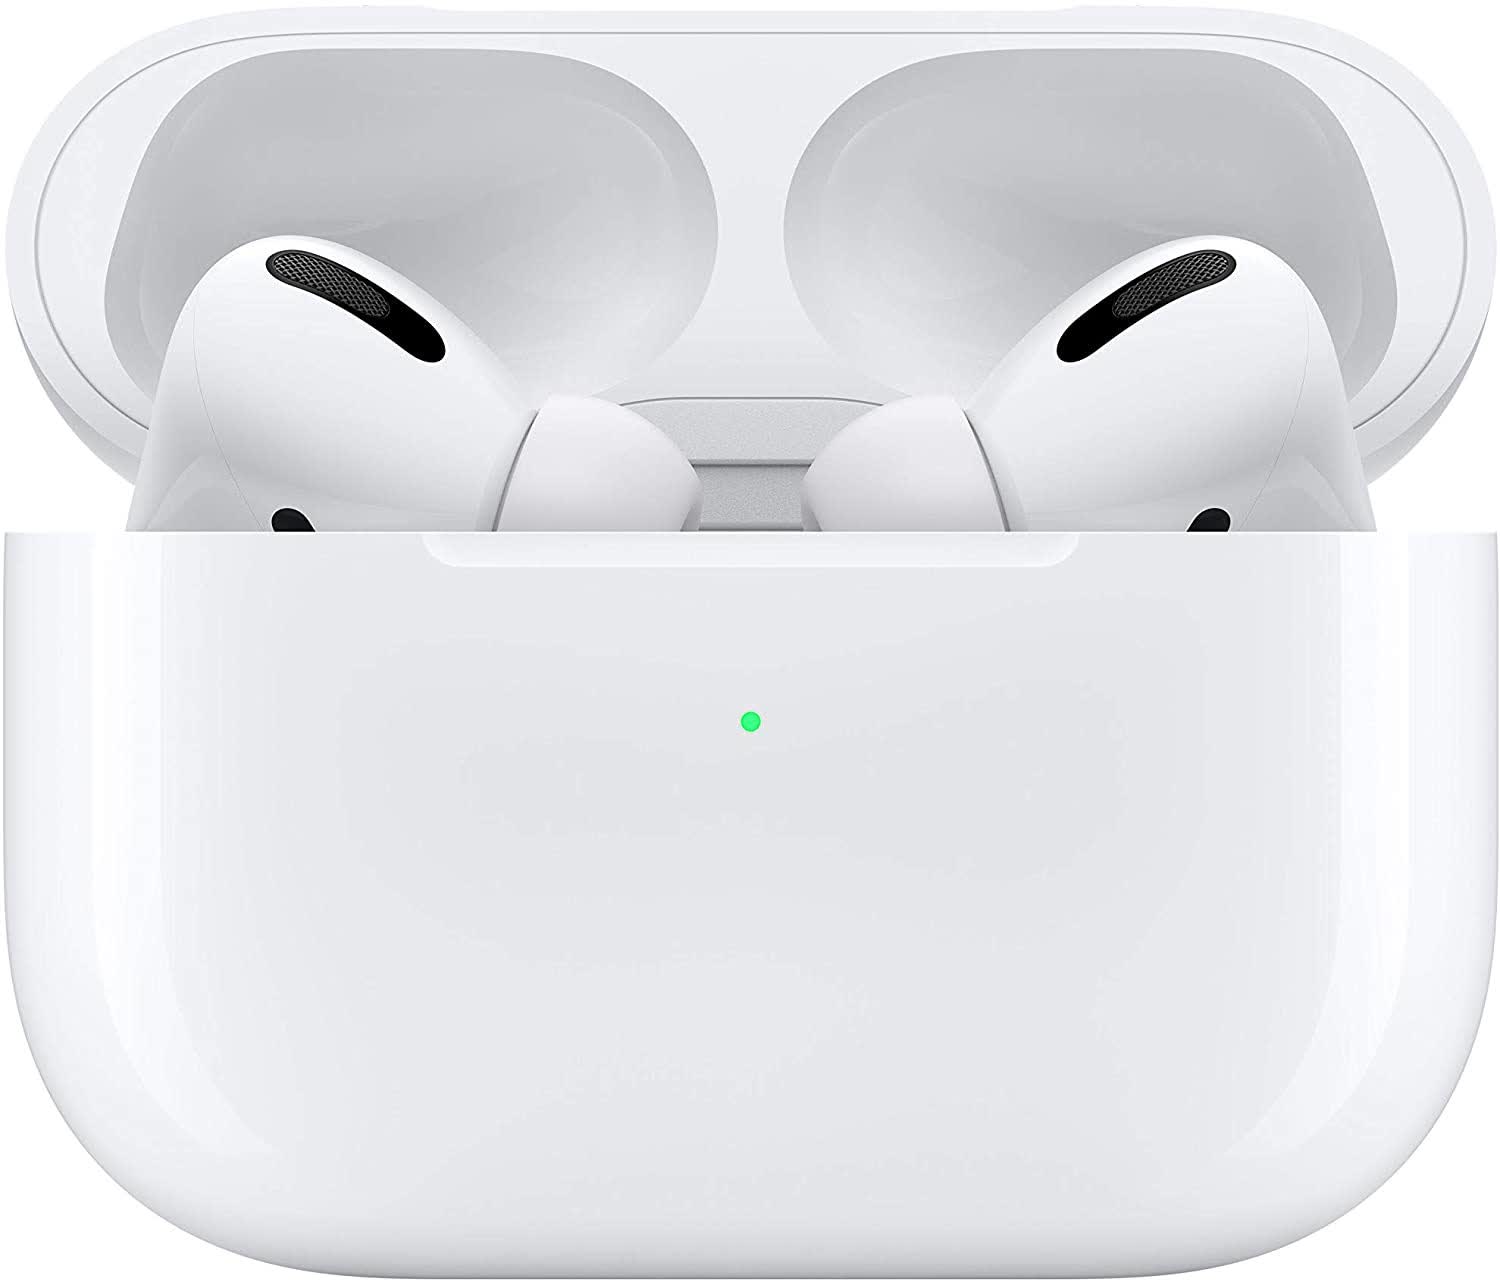 Apple AirPods Pro 2 sporting new design and improved silicon expected in late 2022